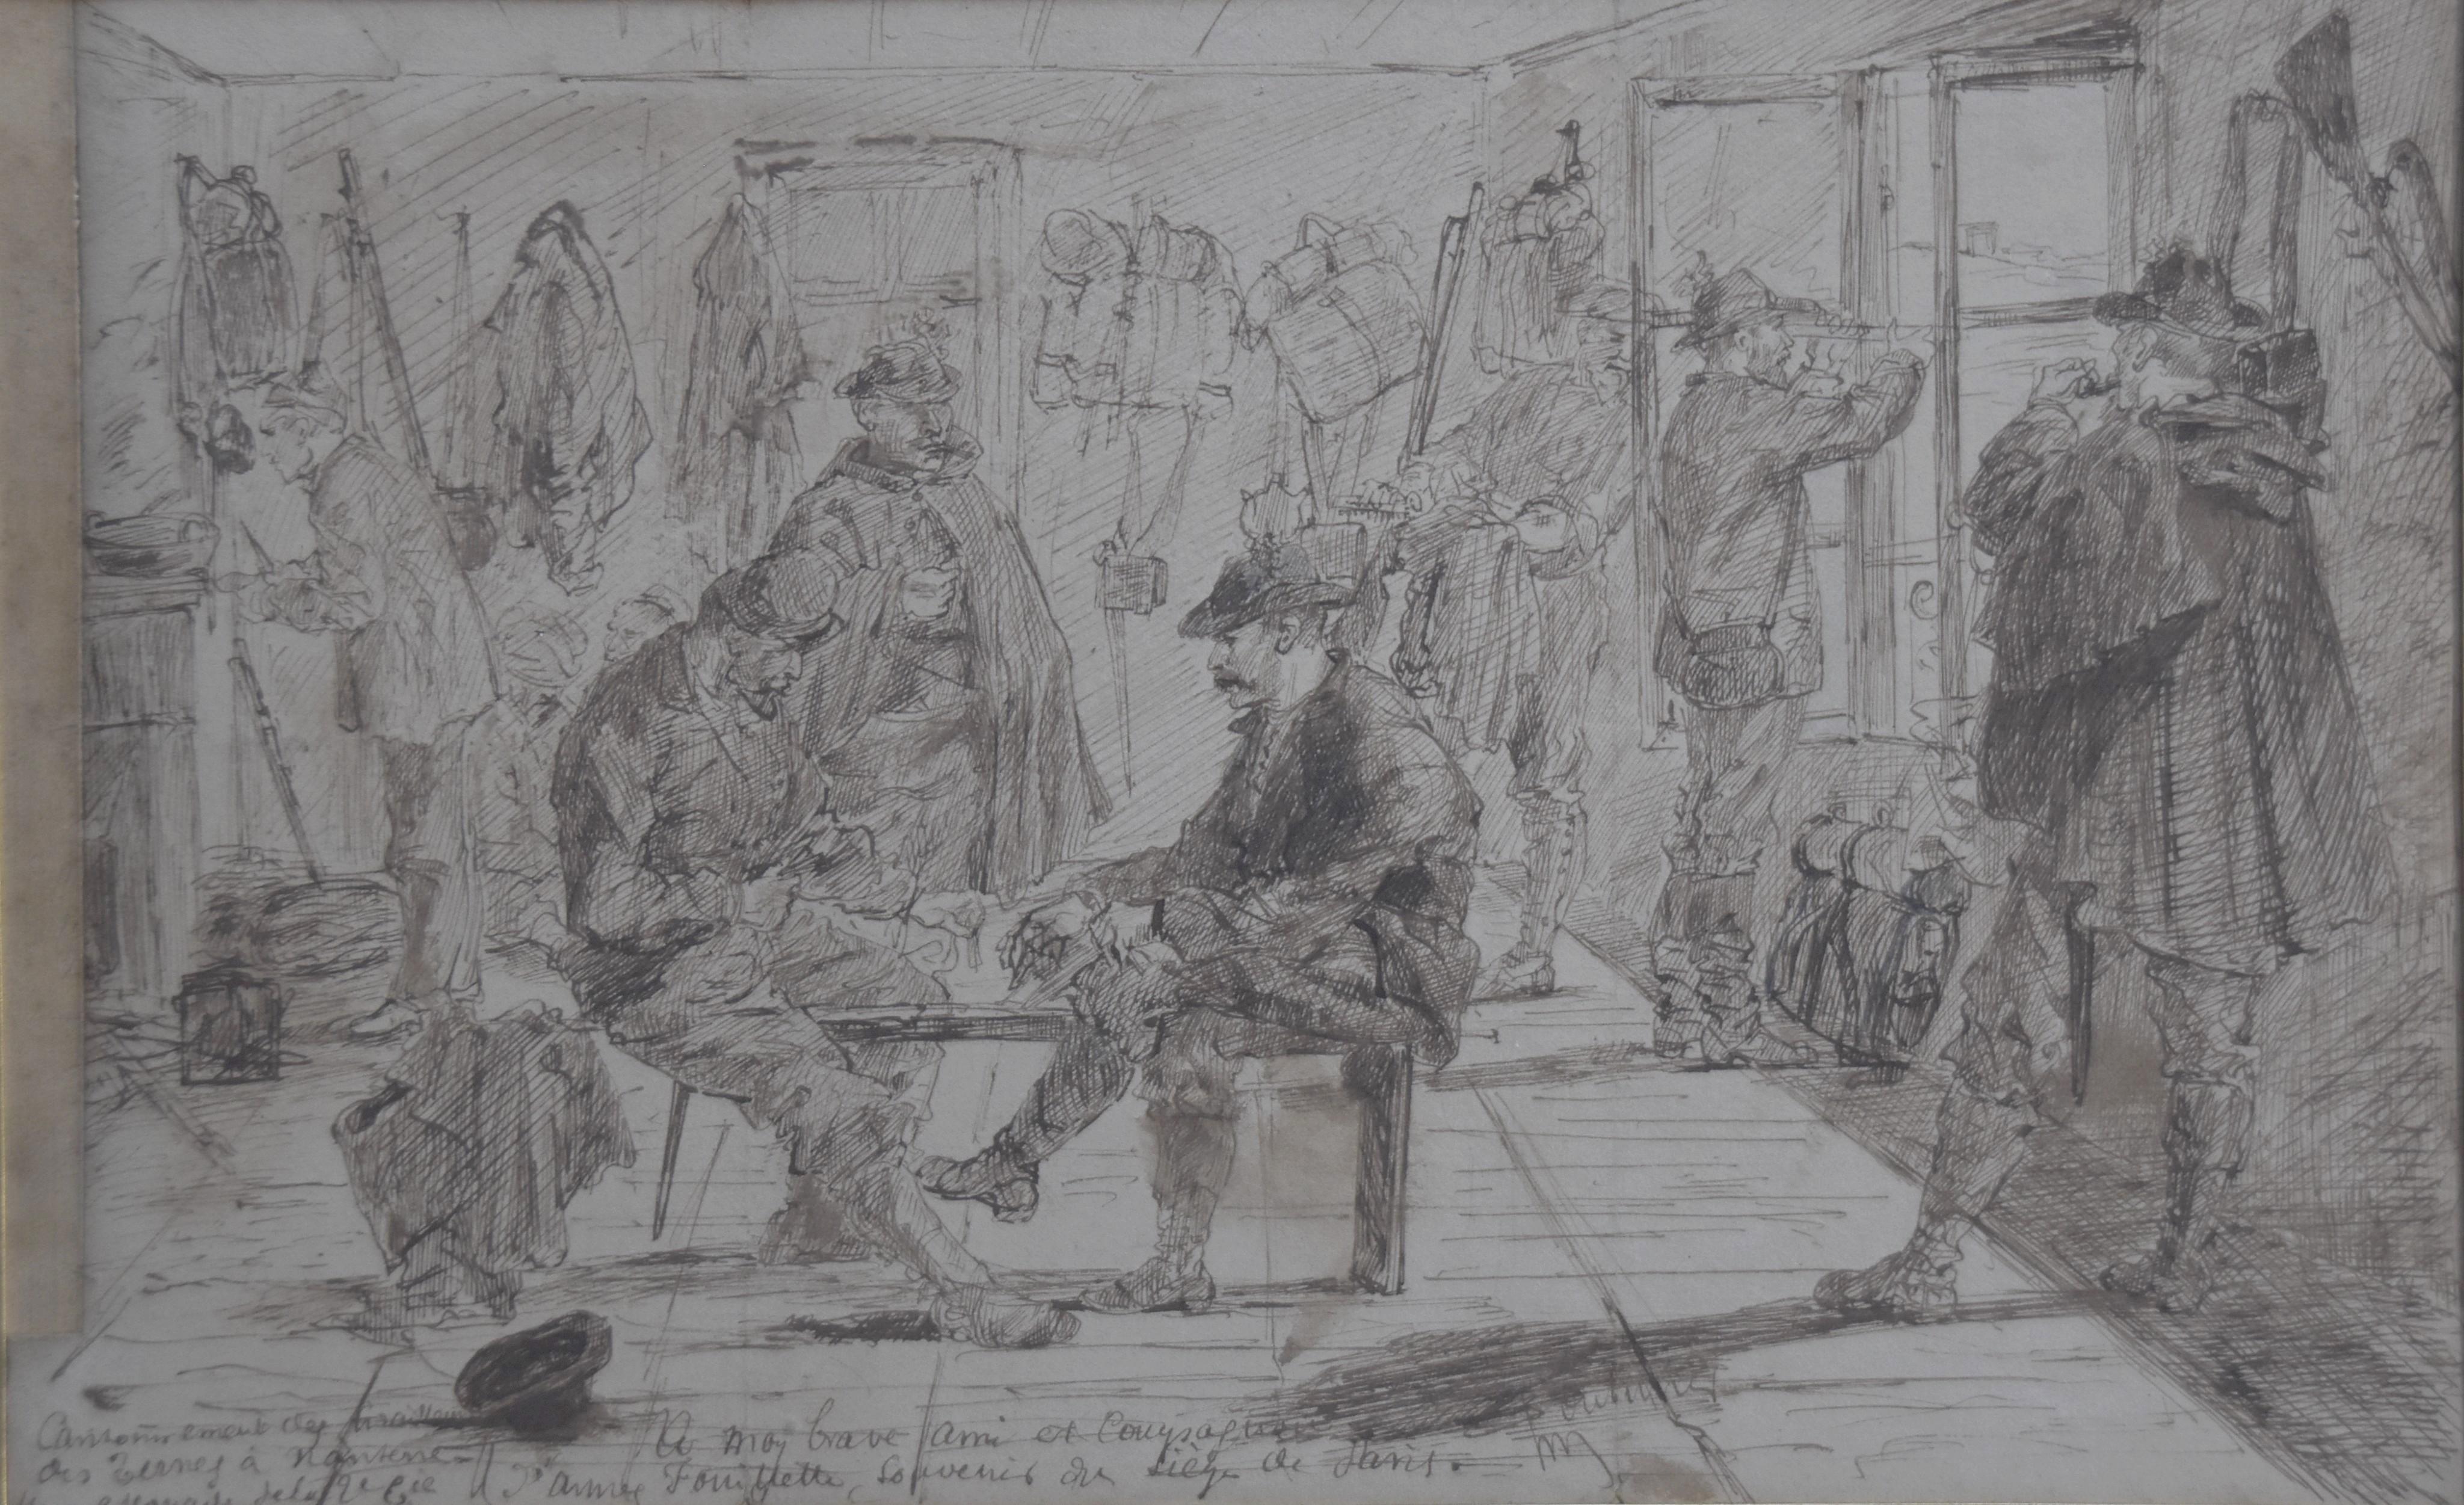 Unknown Figurative Art - Episode of the Franco-Prussian war of 1870, a cantonment of soldiers, drawing